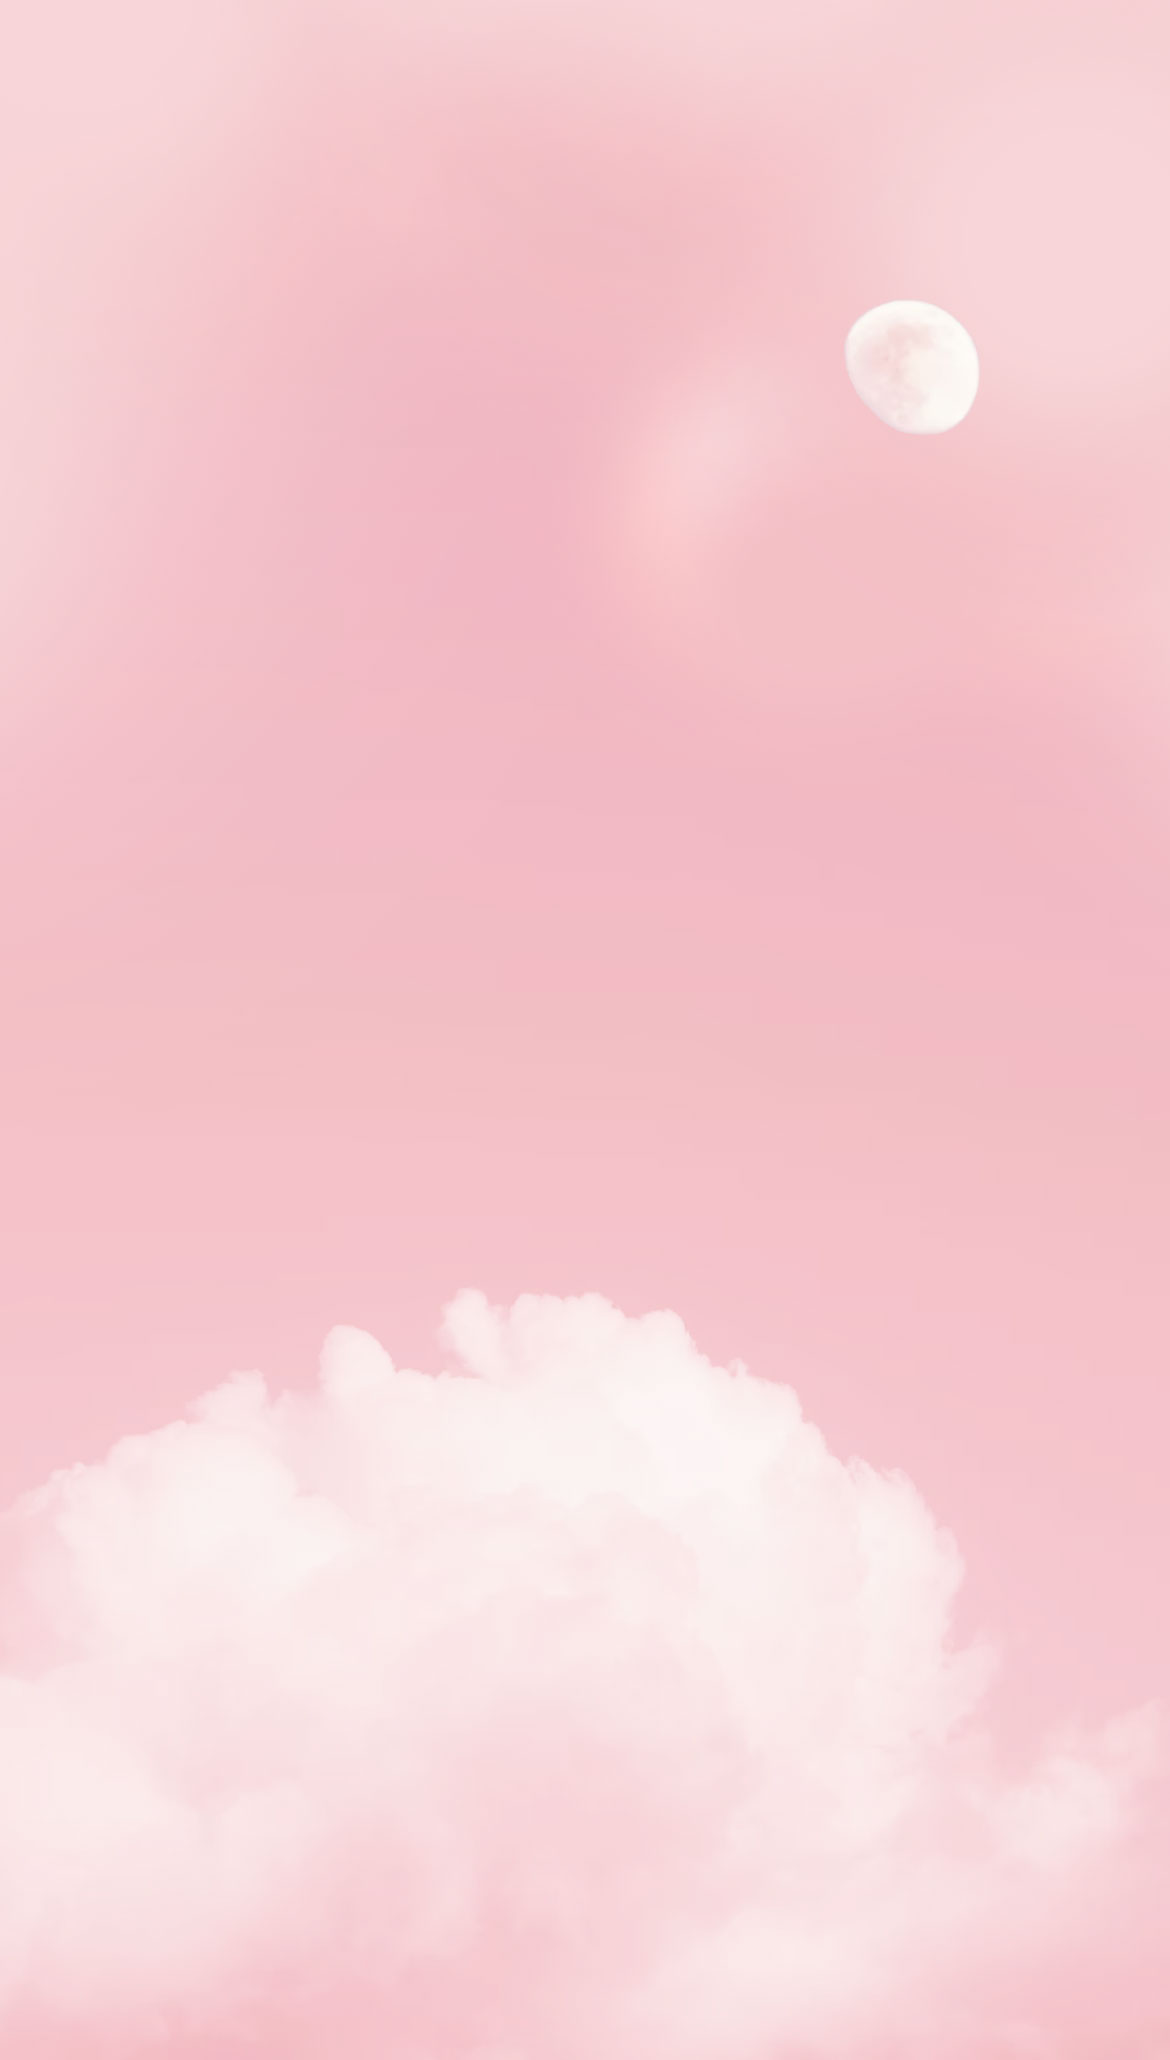 Pink Aesthetic Picture, Pink Sky & The Moon Wallpaper